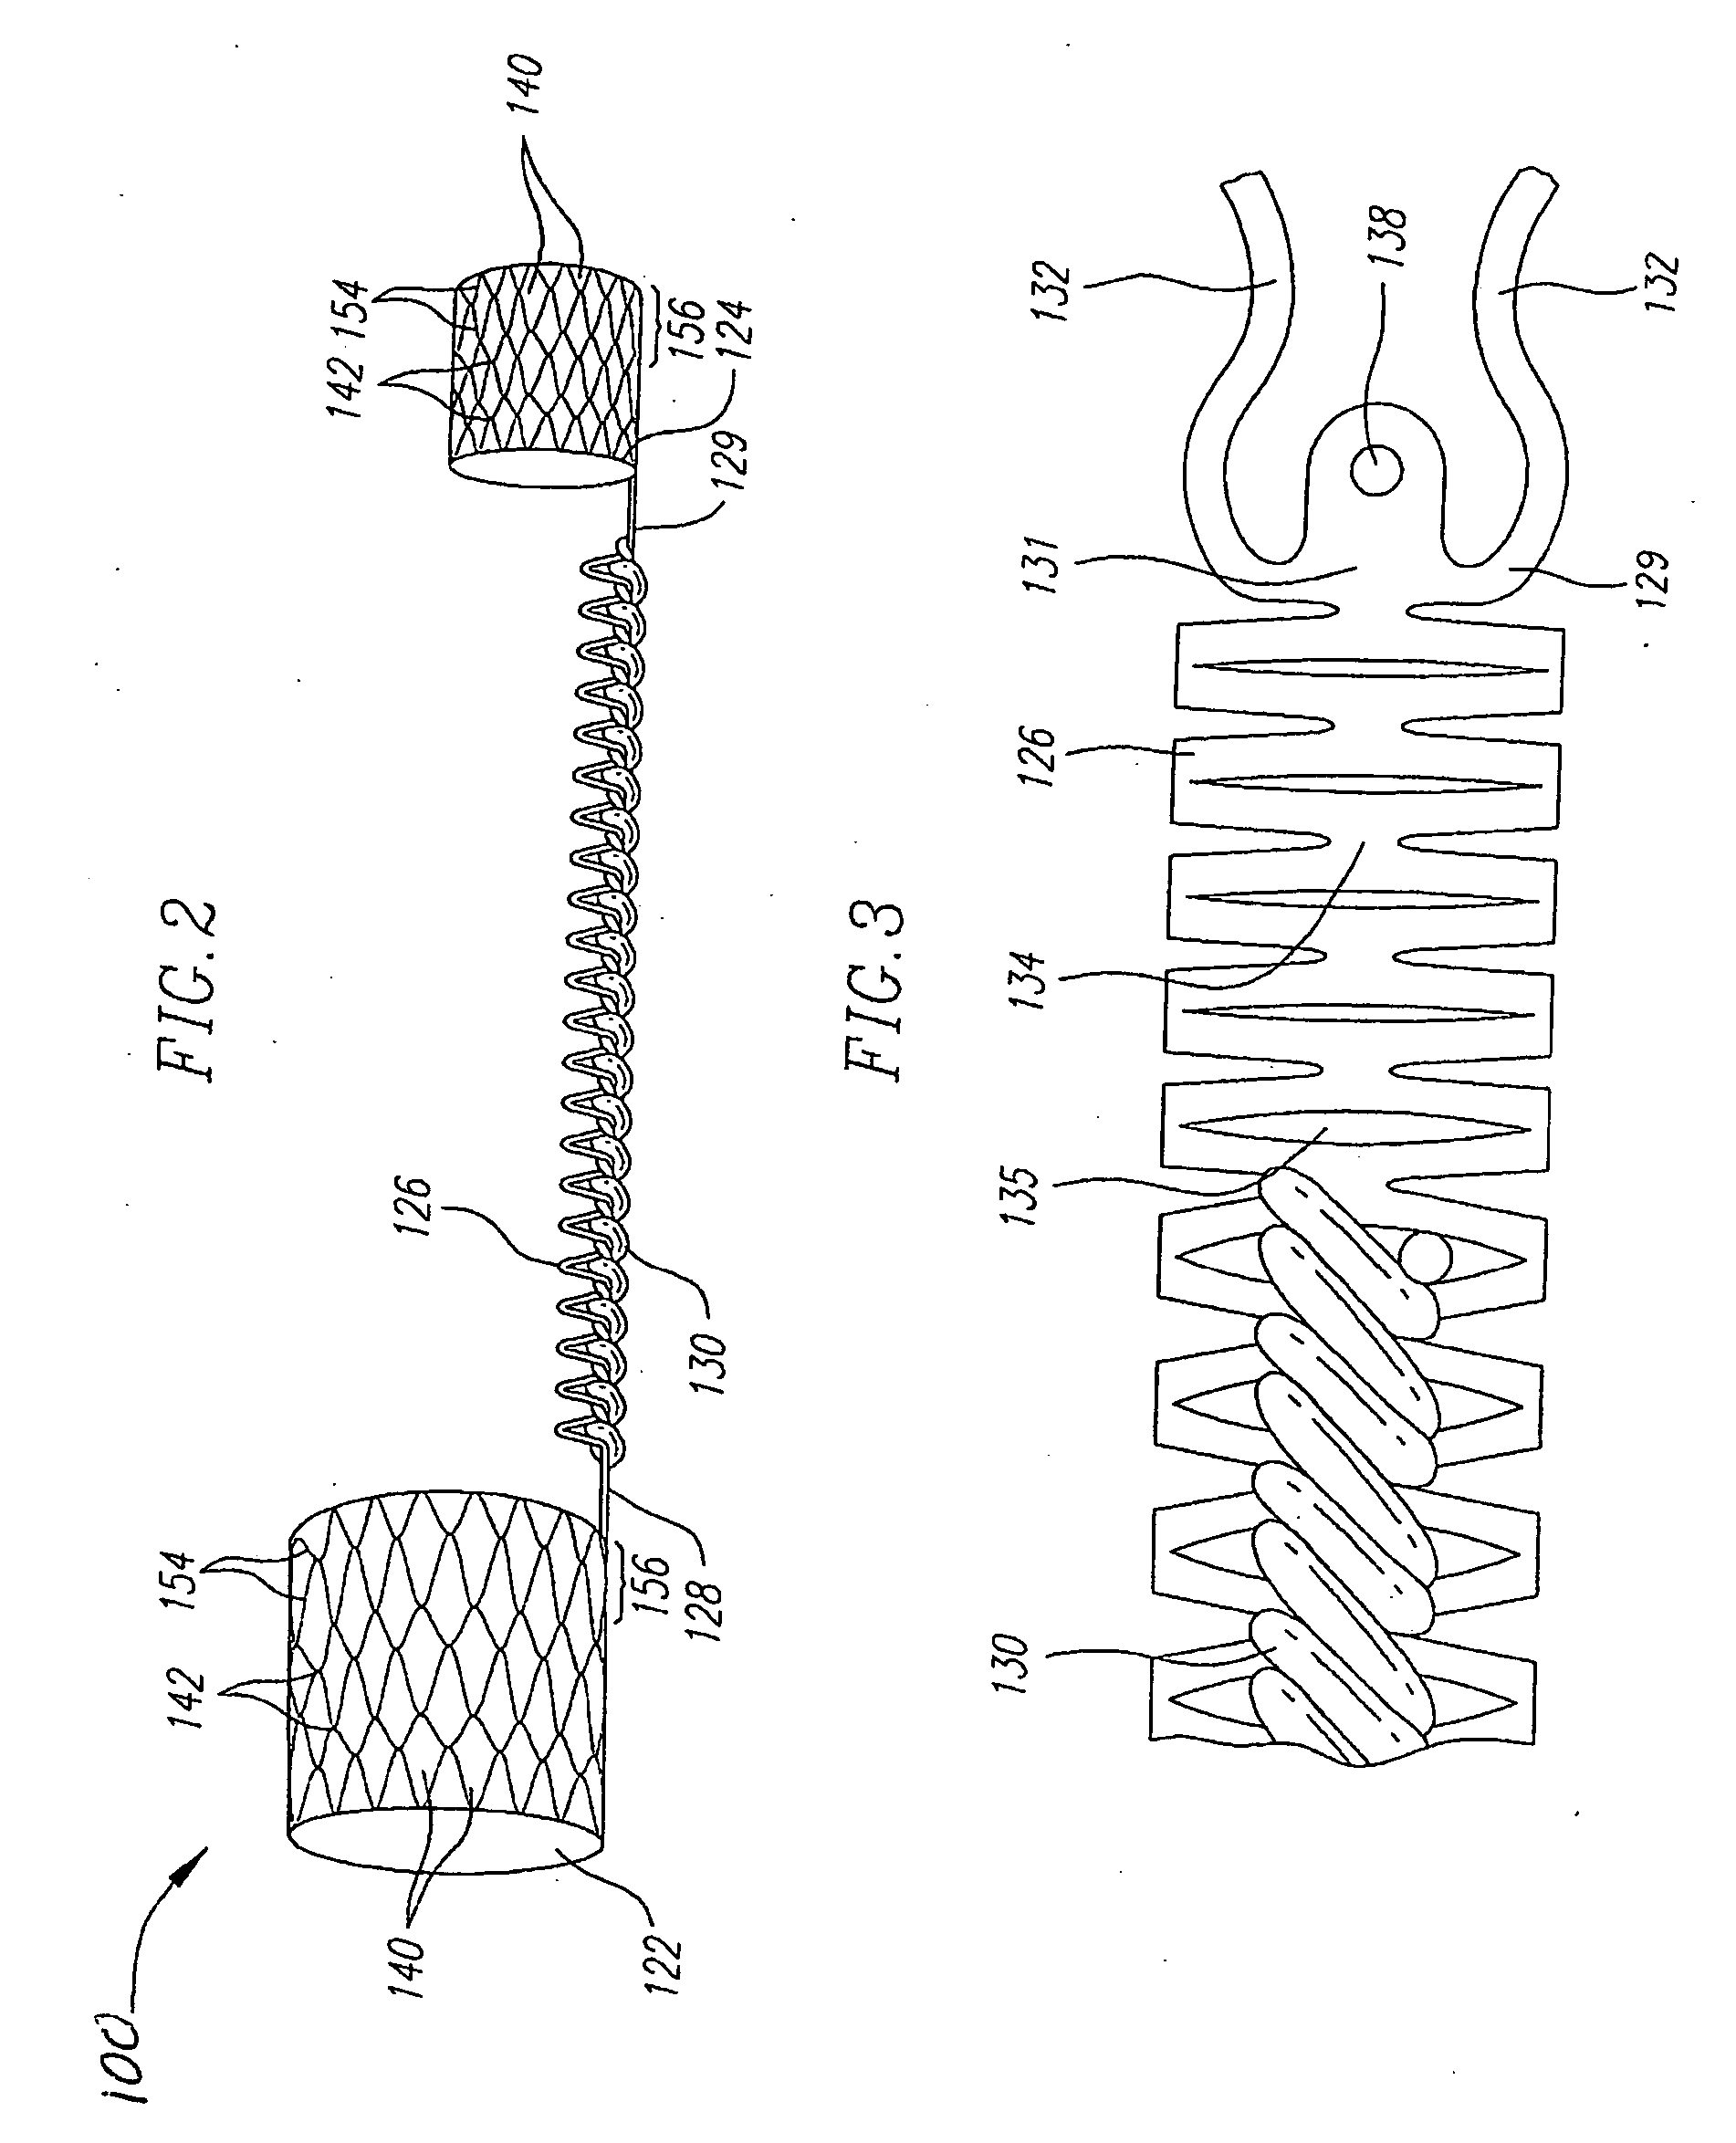 Medical implant with reinforcement mechanism